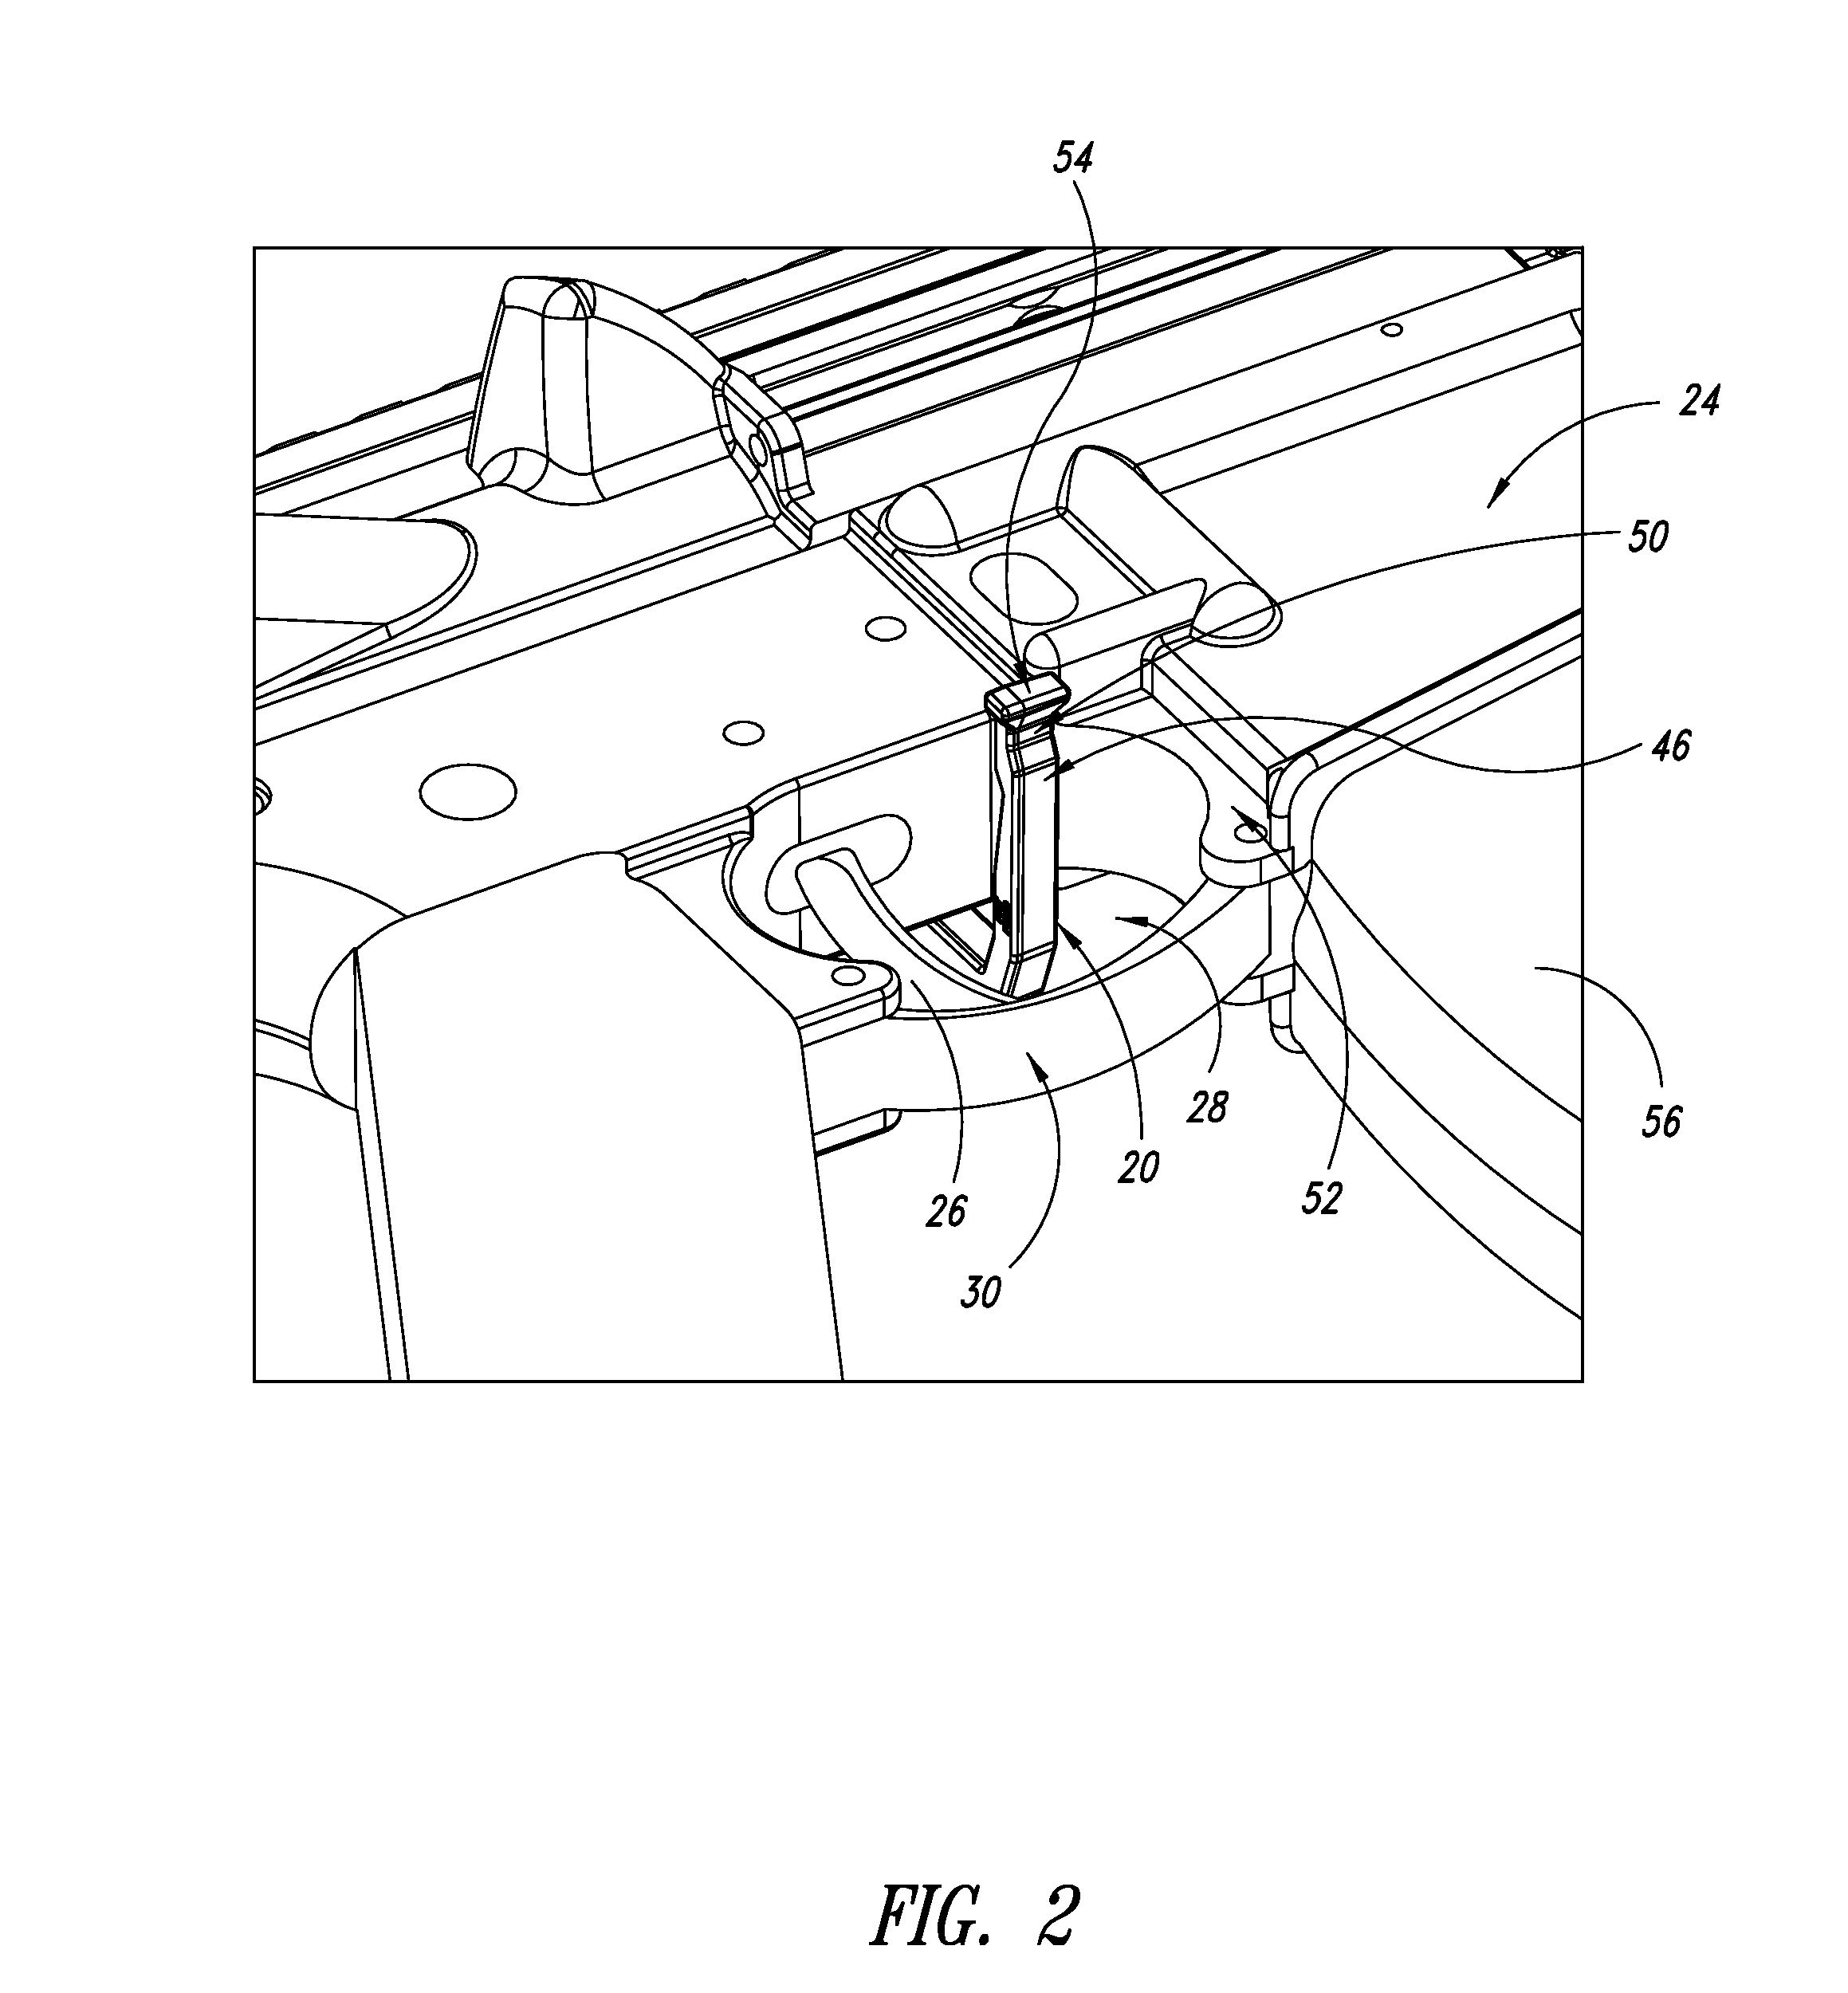 Bolt catch-release lever